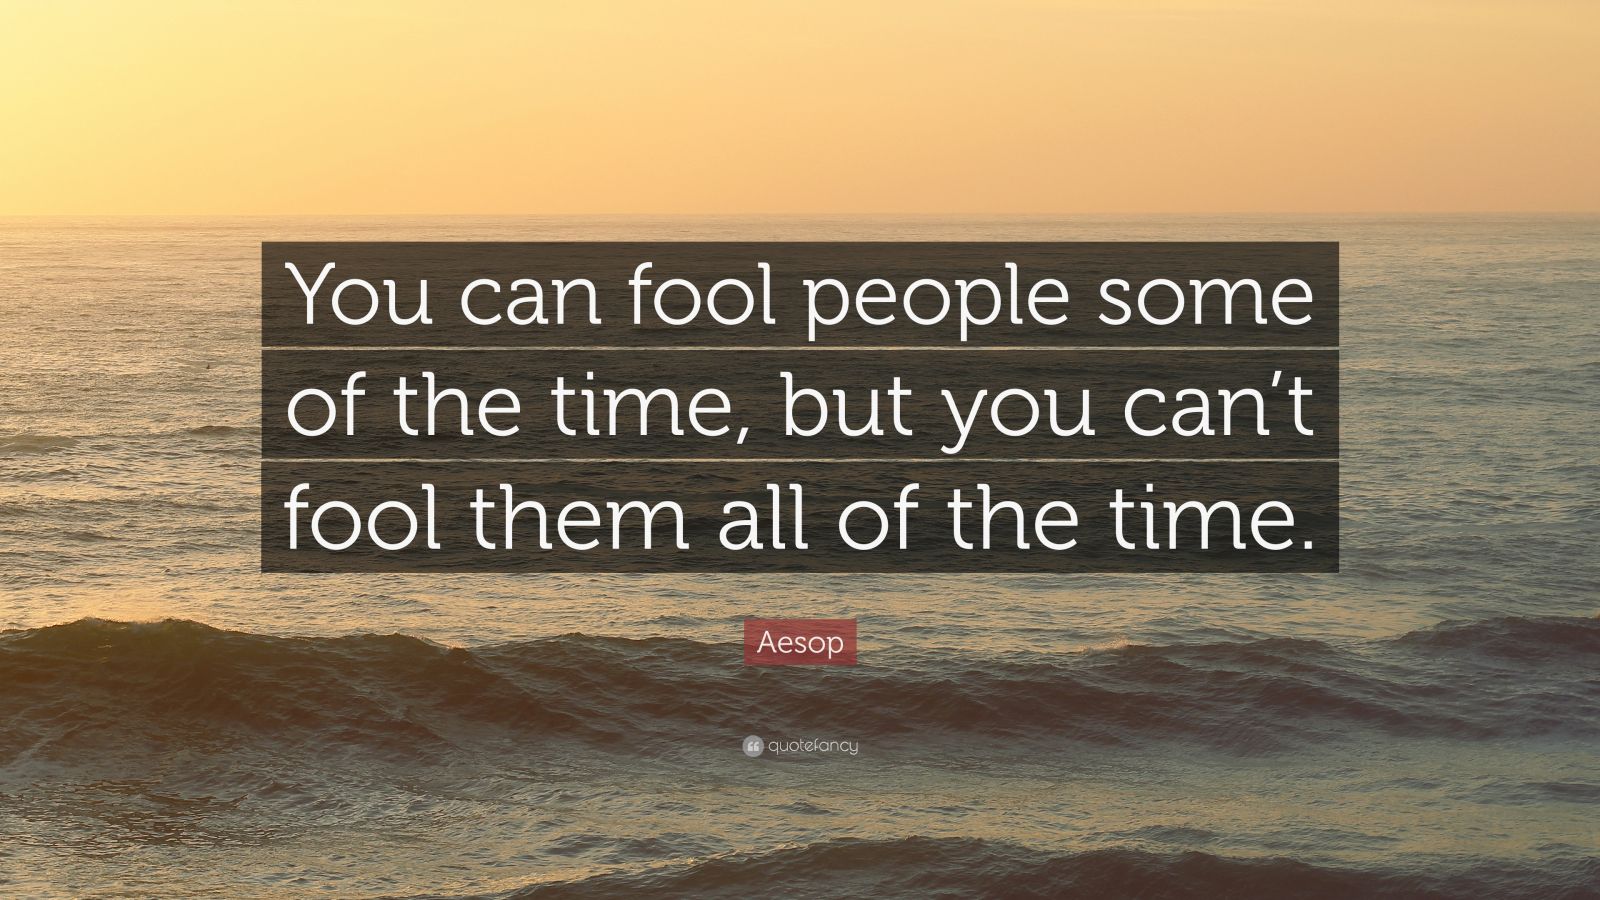 Aesop Quote: “You can fool people some of the time, but you can’t fool ...